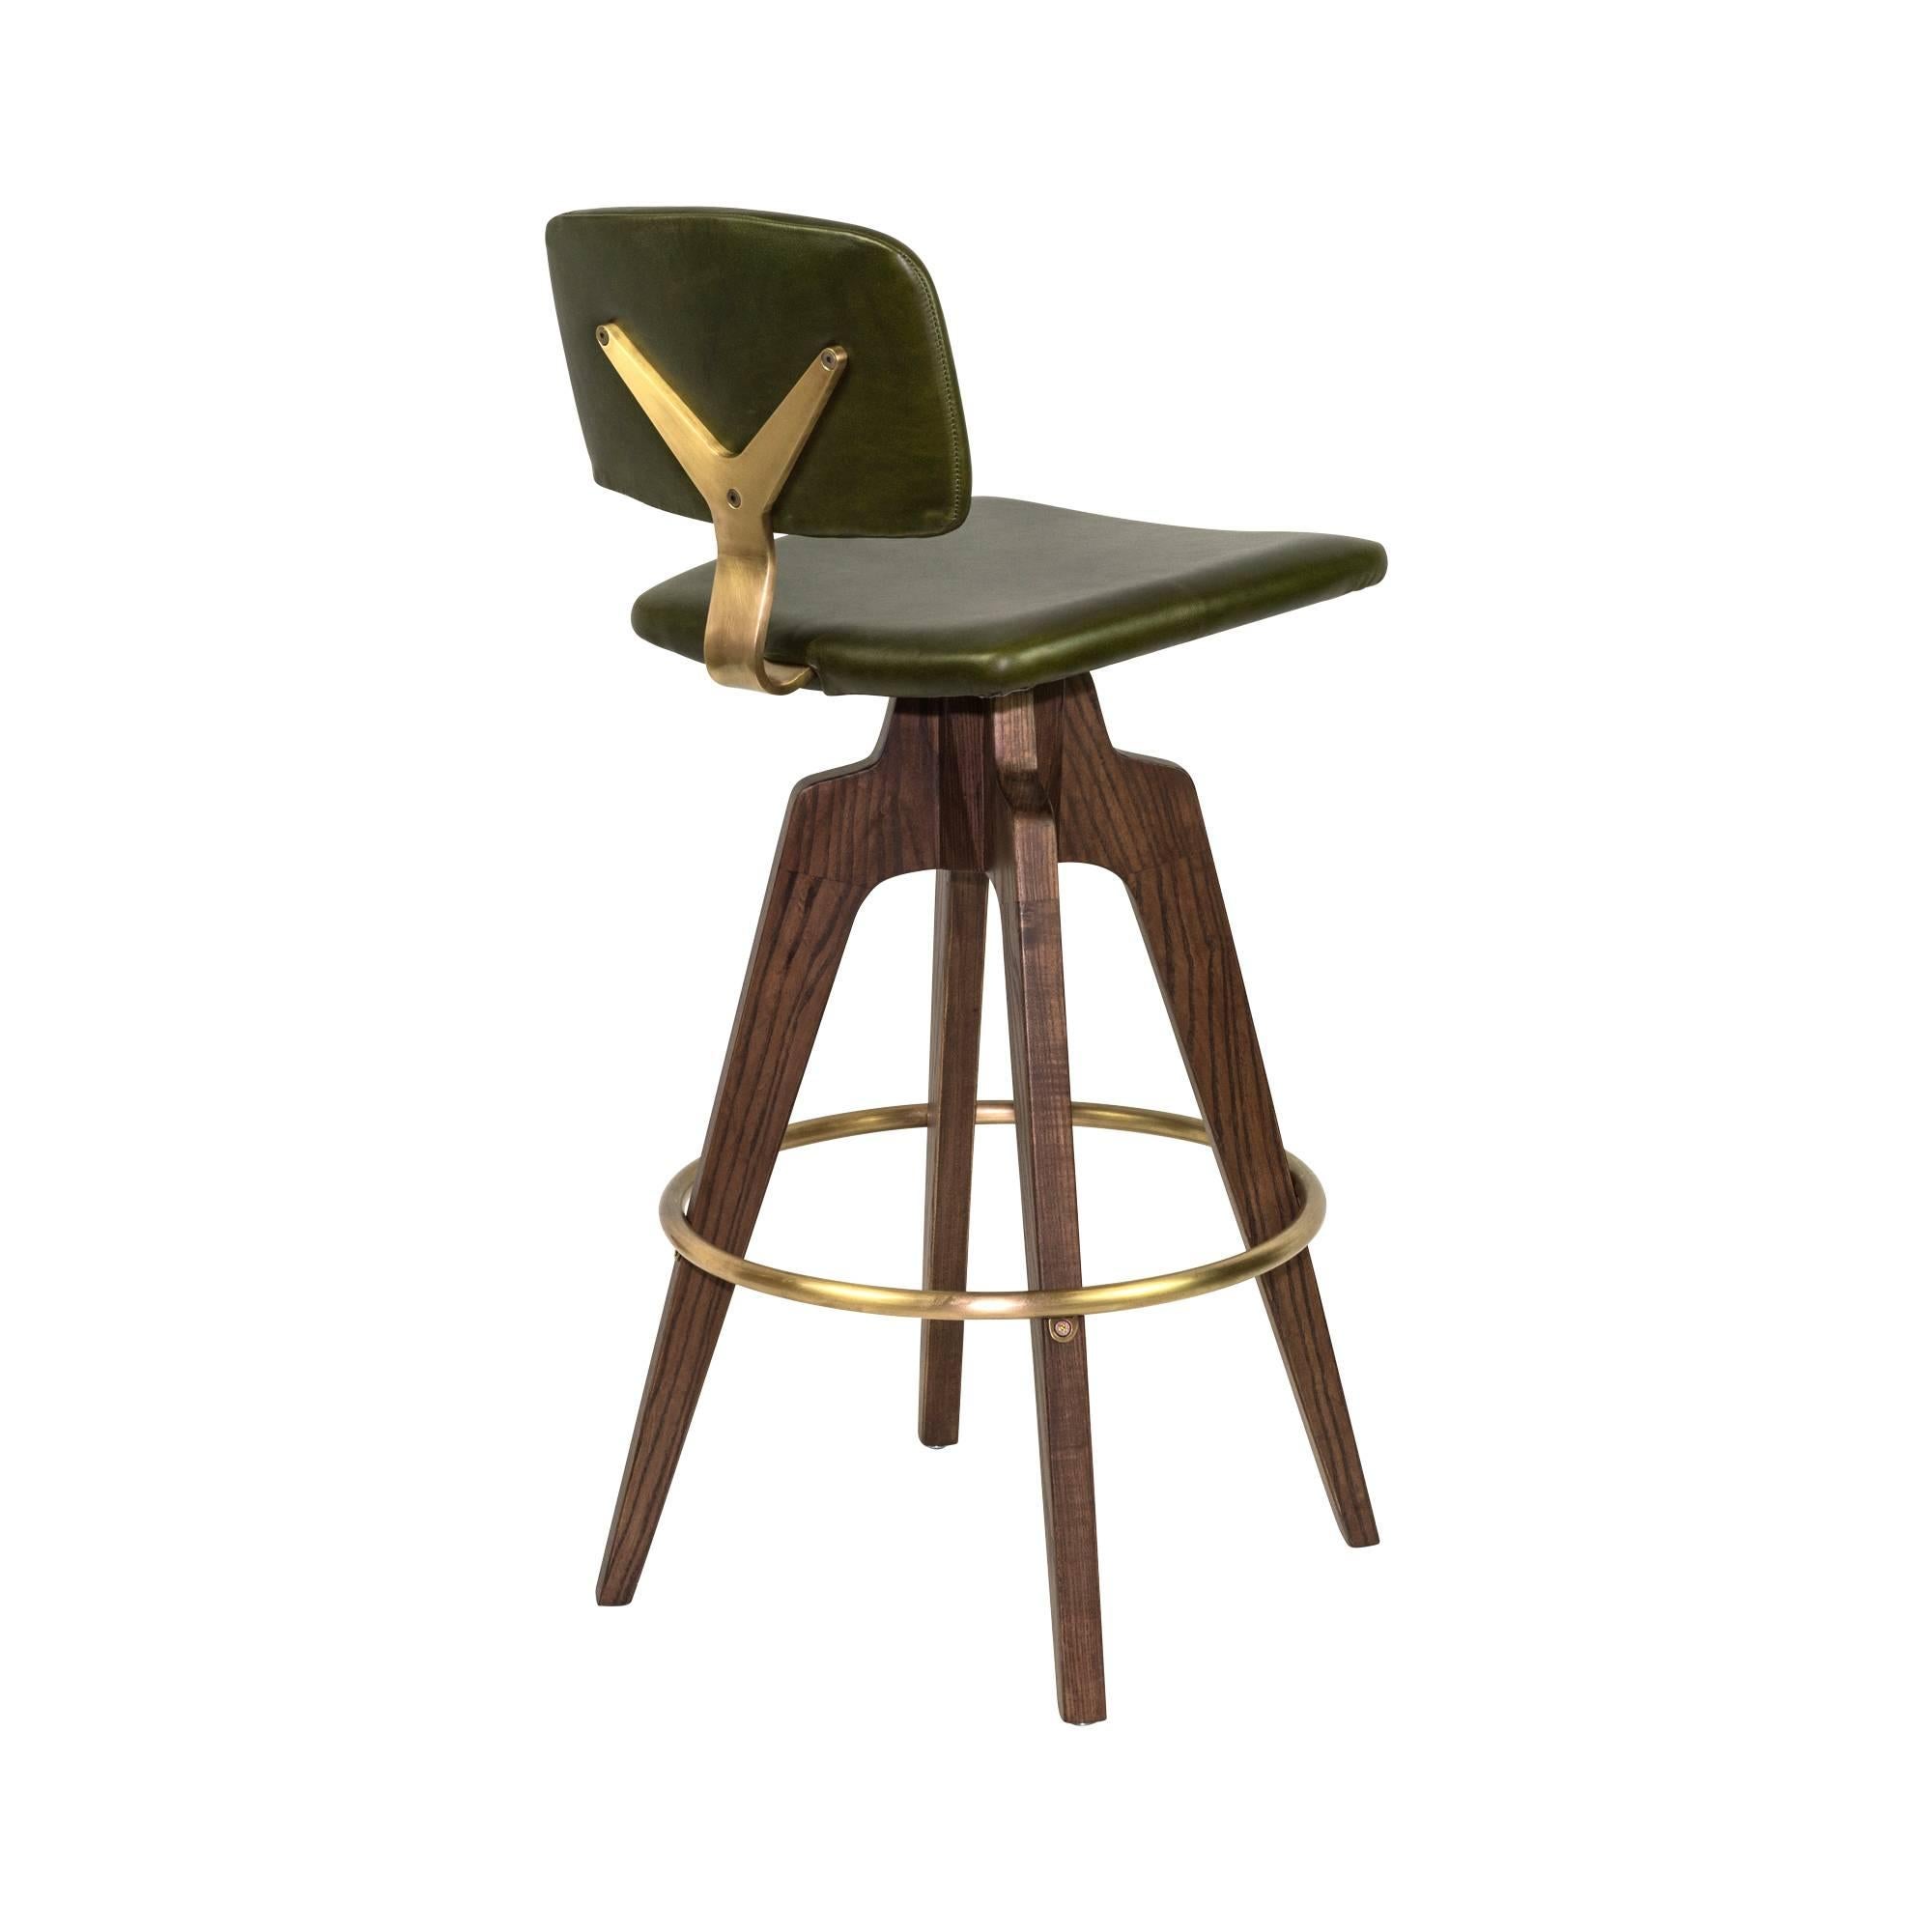 Metalwork Reeves Swivel Bar Stool W/ Ash legs stained Walnut, Leather & Brass Finish.  For Sale